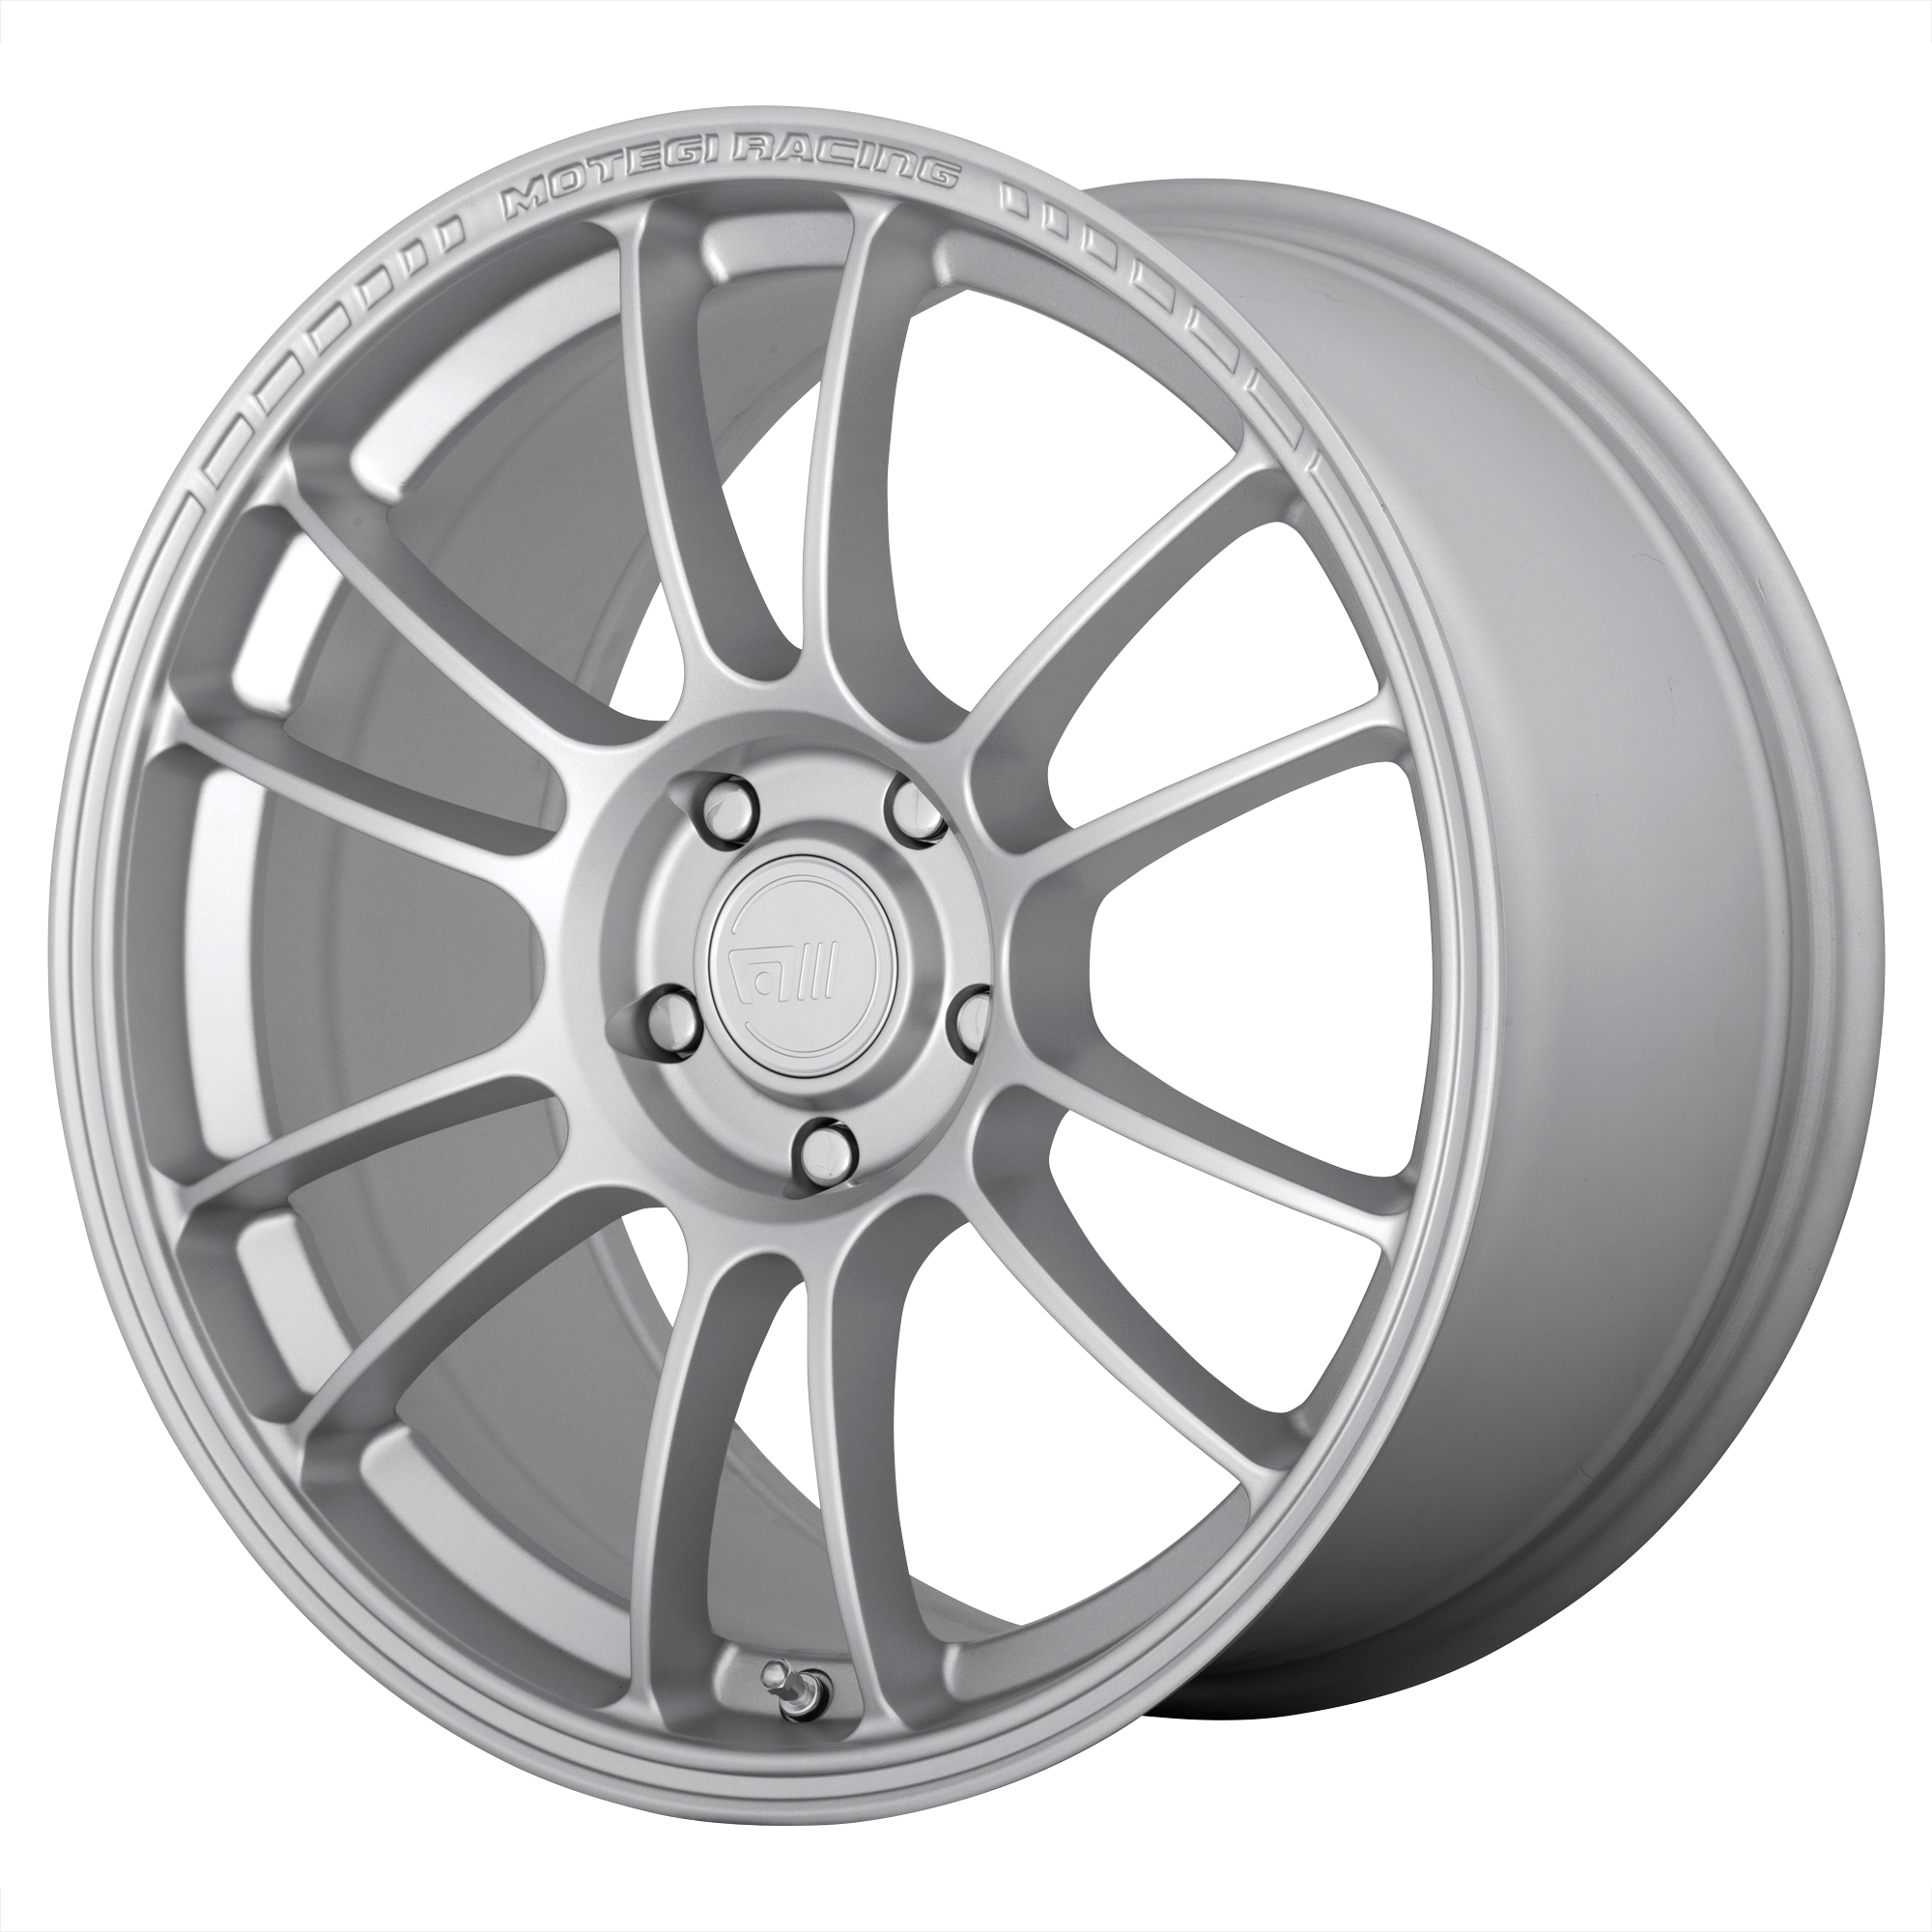 SS6 18x8.5 5x100.00 HYPER SILVER (42 mm) - Tires and Engine Performance